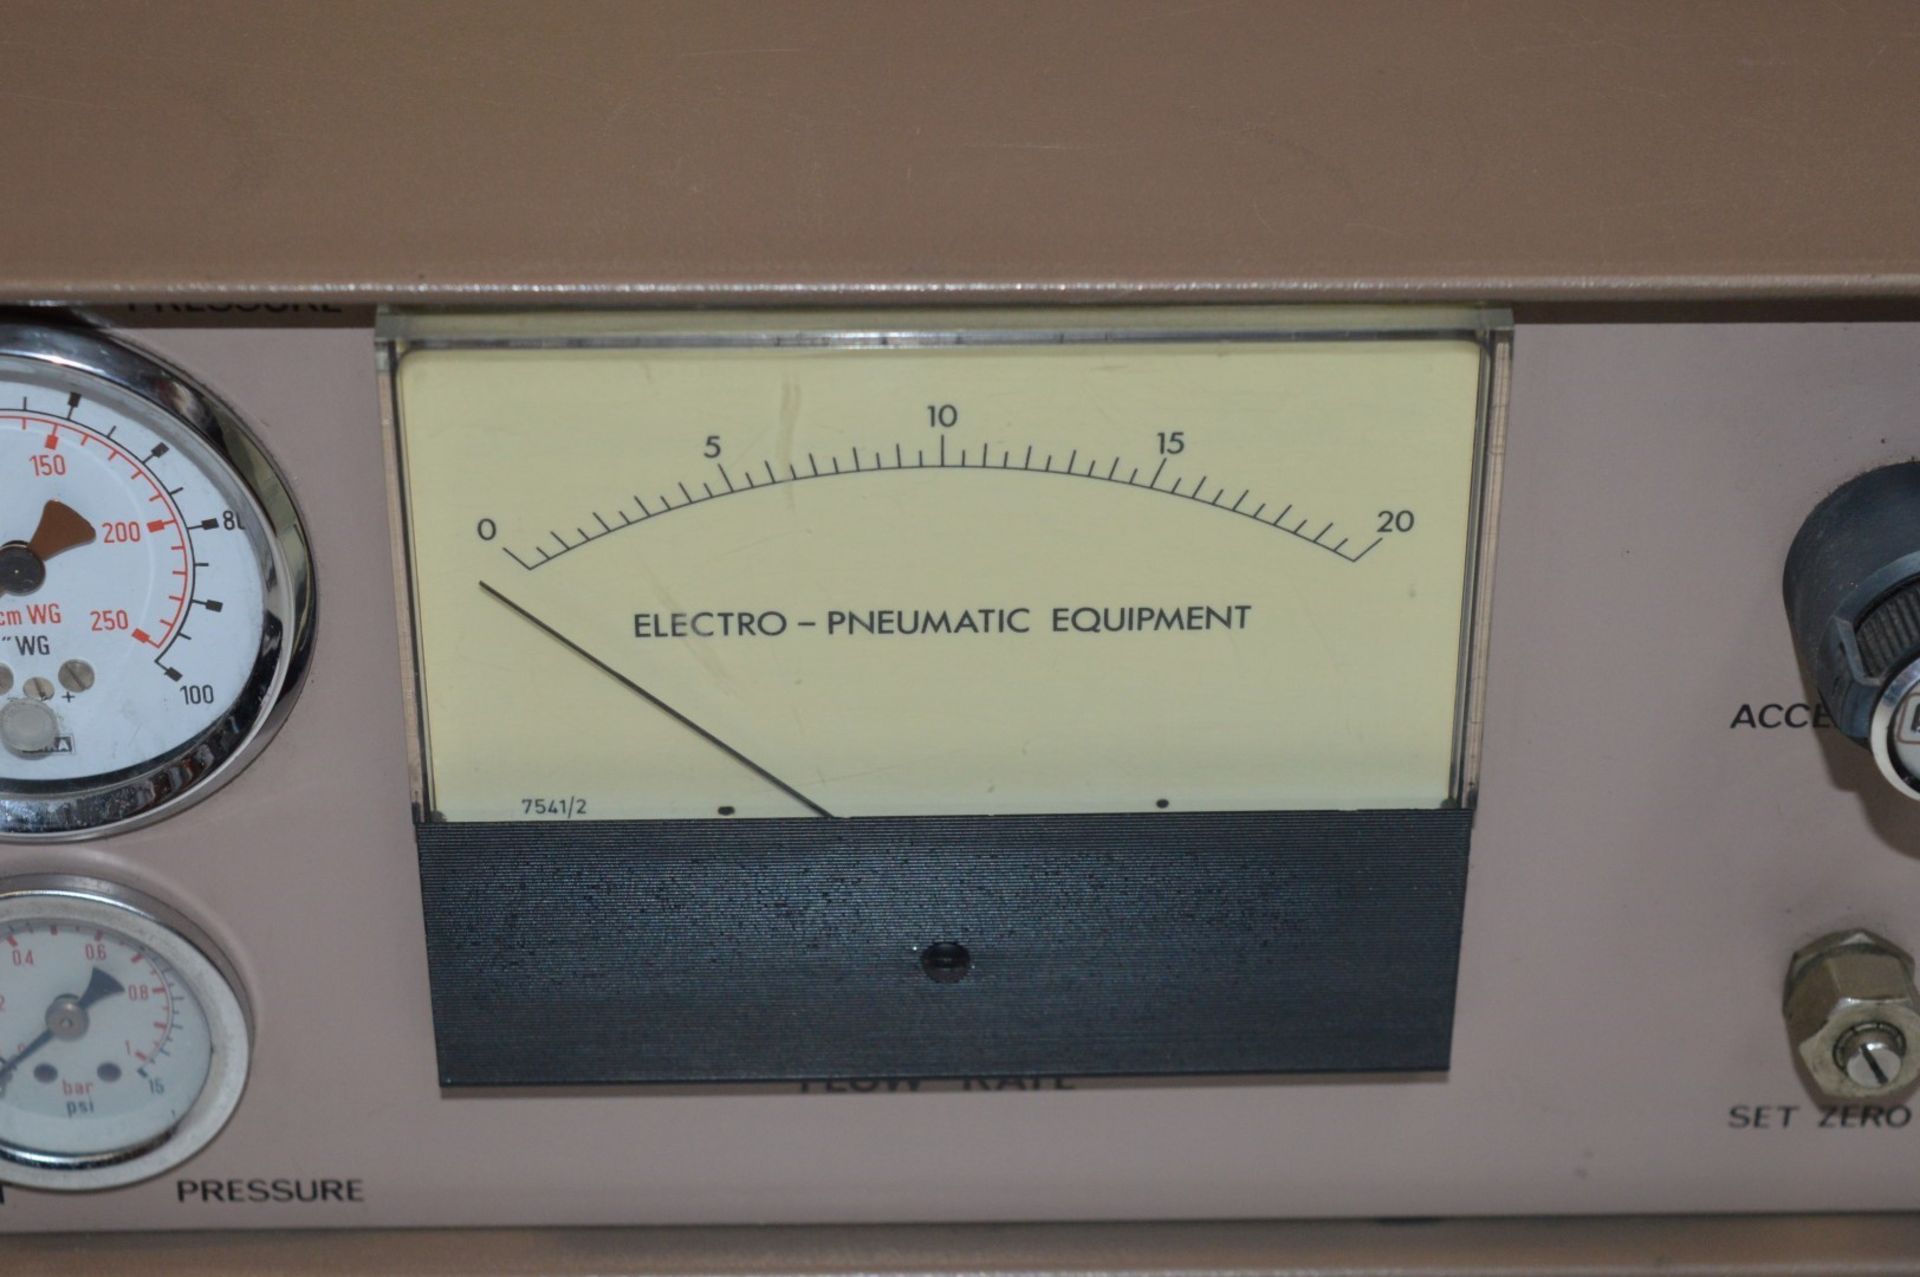 1 x Epetron 200 Mk2 Electro Pneumatic Tester - Vintage Test Equipment - CL011 - Ref J611 - Location: - Image 6 of 8